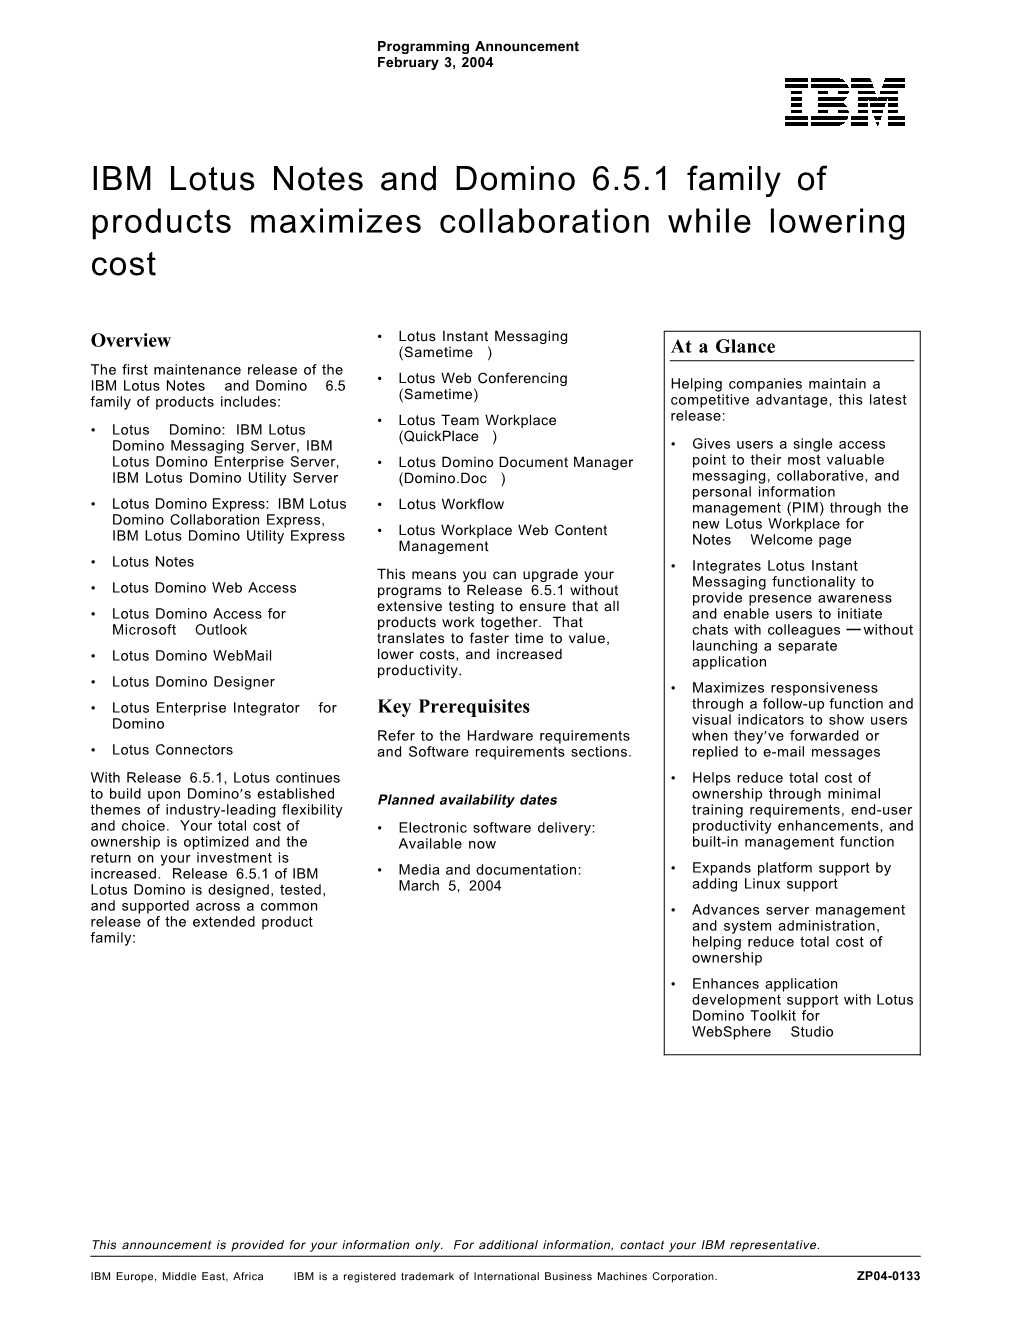 IBM Lotus Notes and Domino 6.5.1 Family of Products Maximizes Collaboration While Lowering Cost